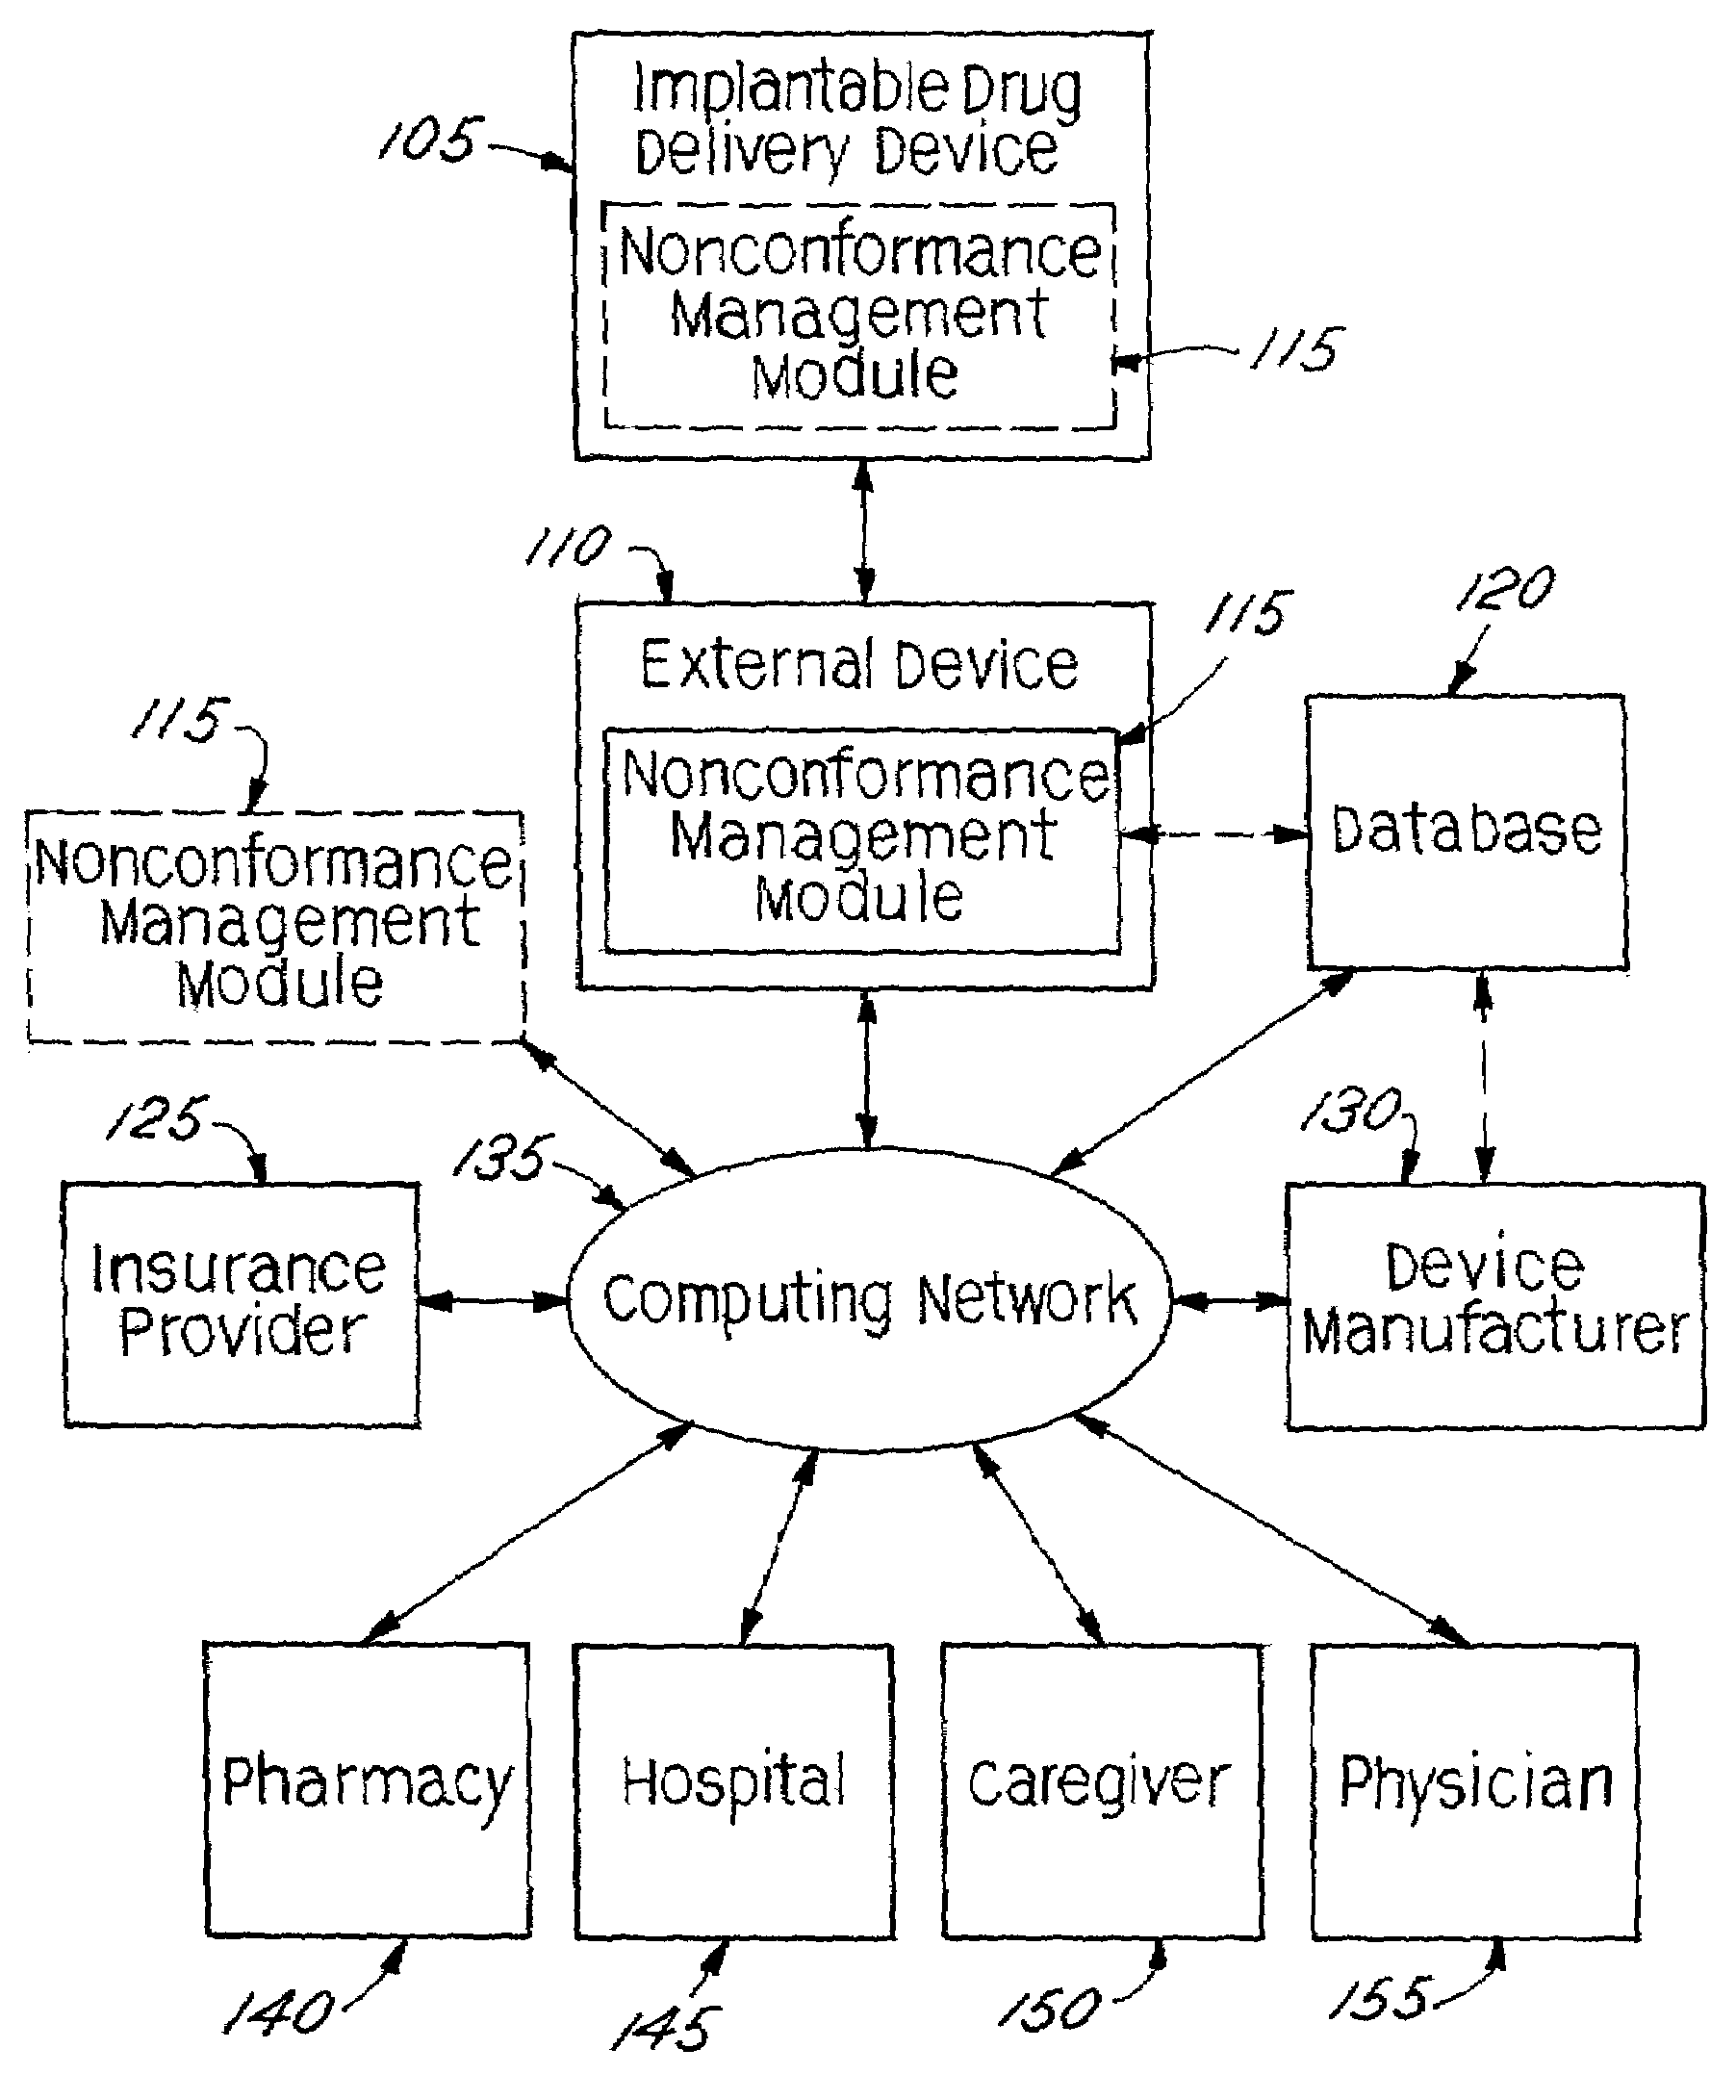 Non-conformance monitoring and control techniques for an implantable medical device